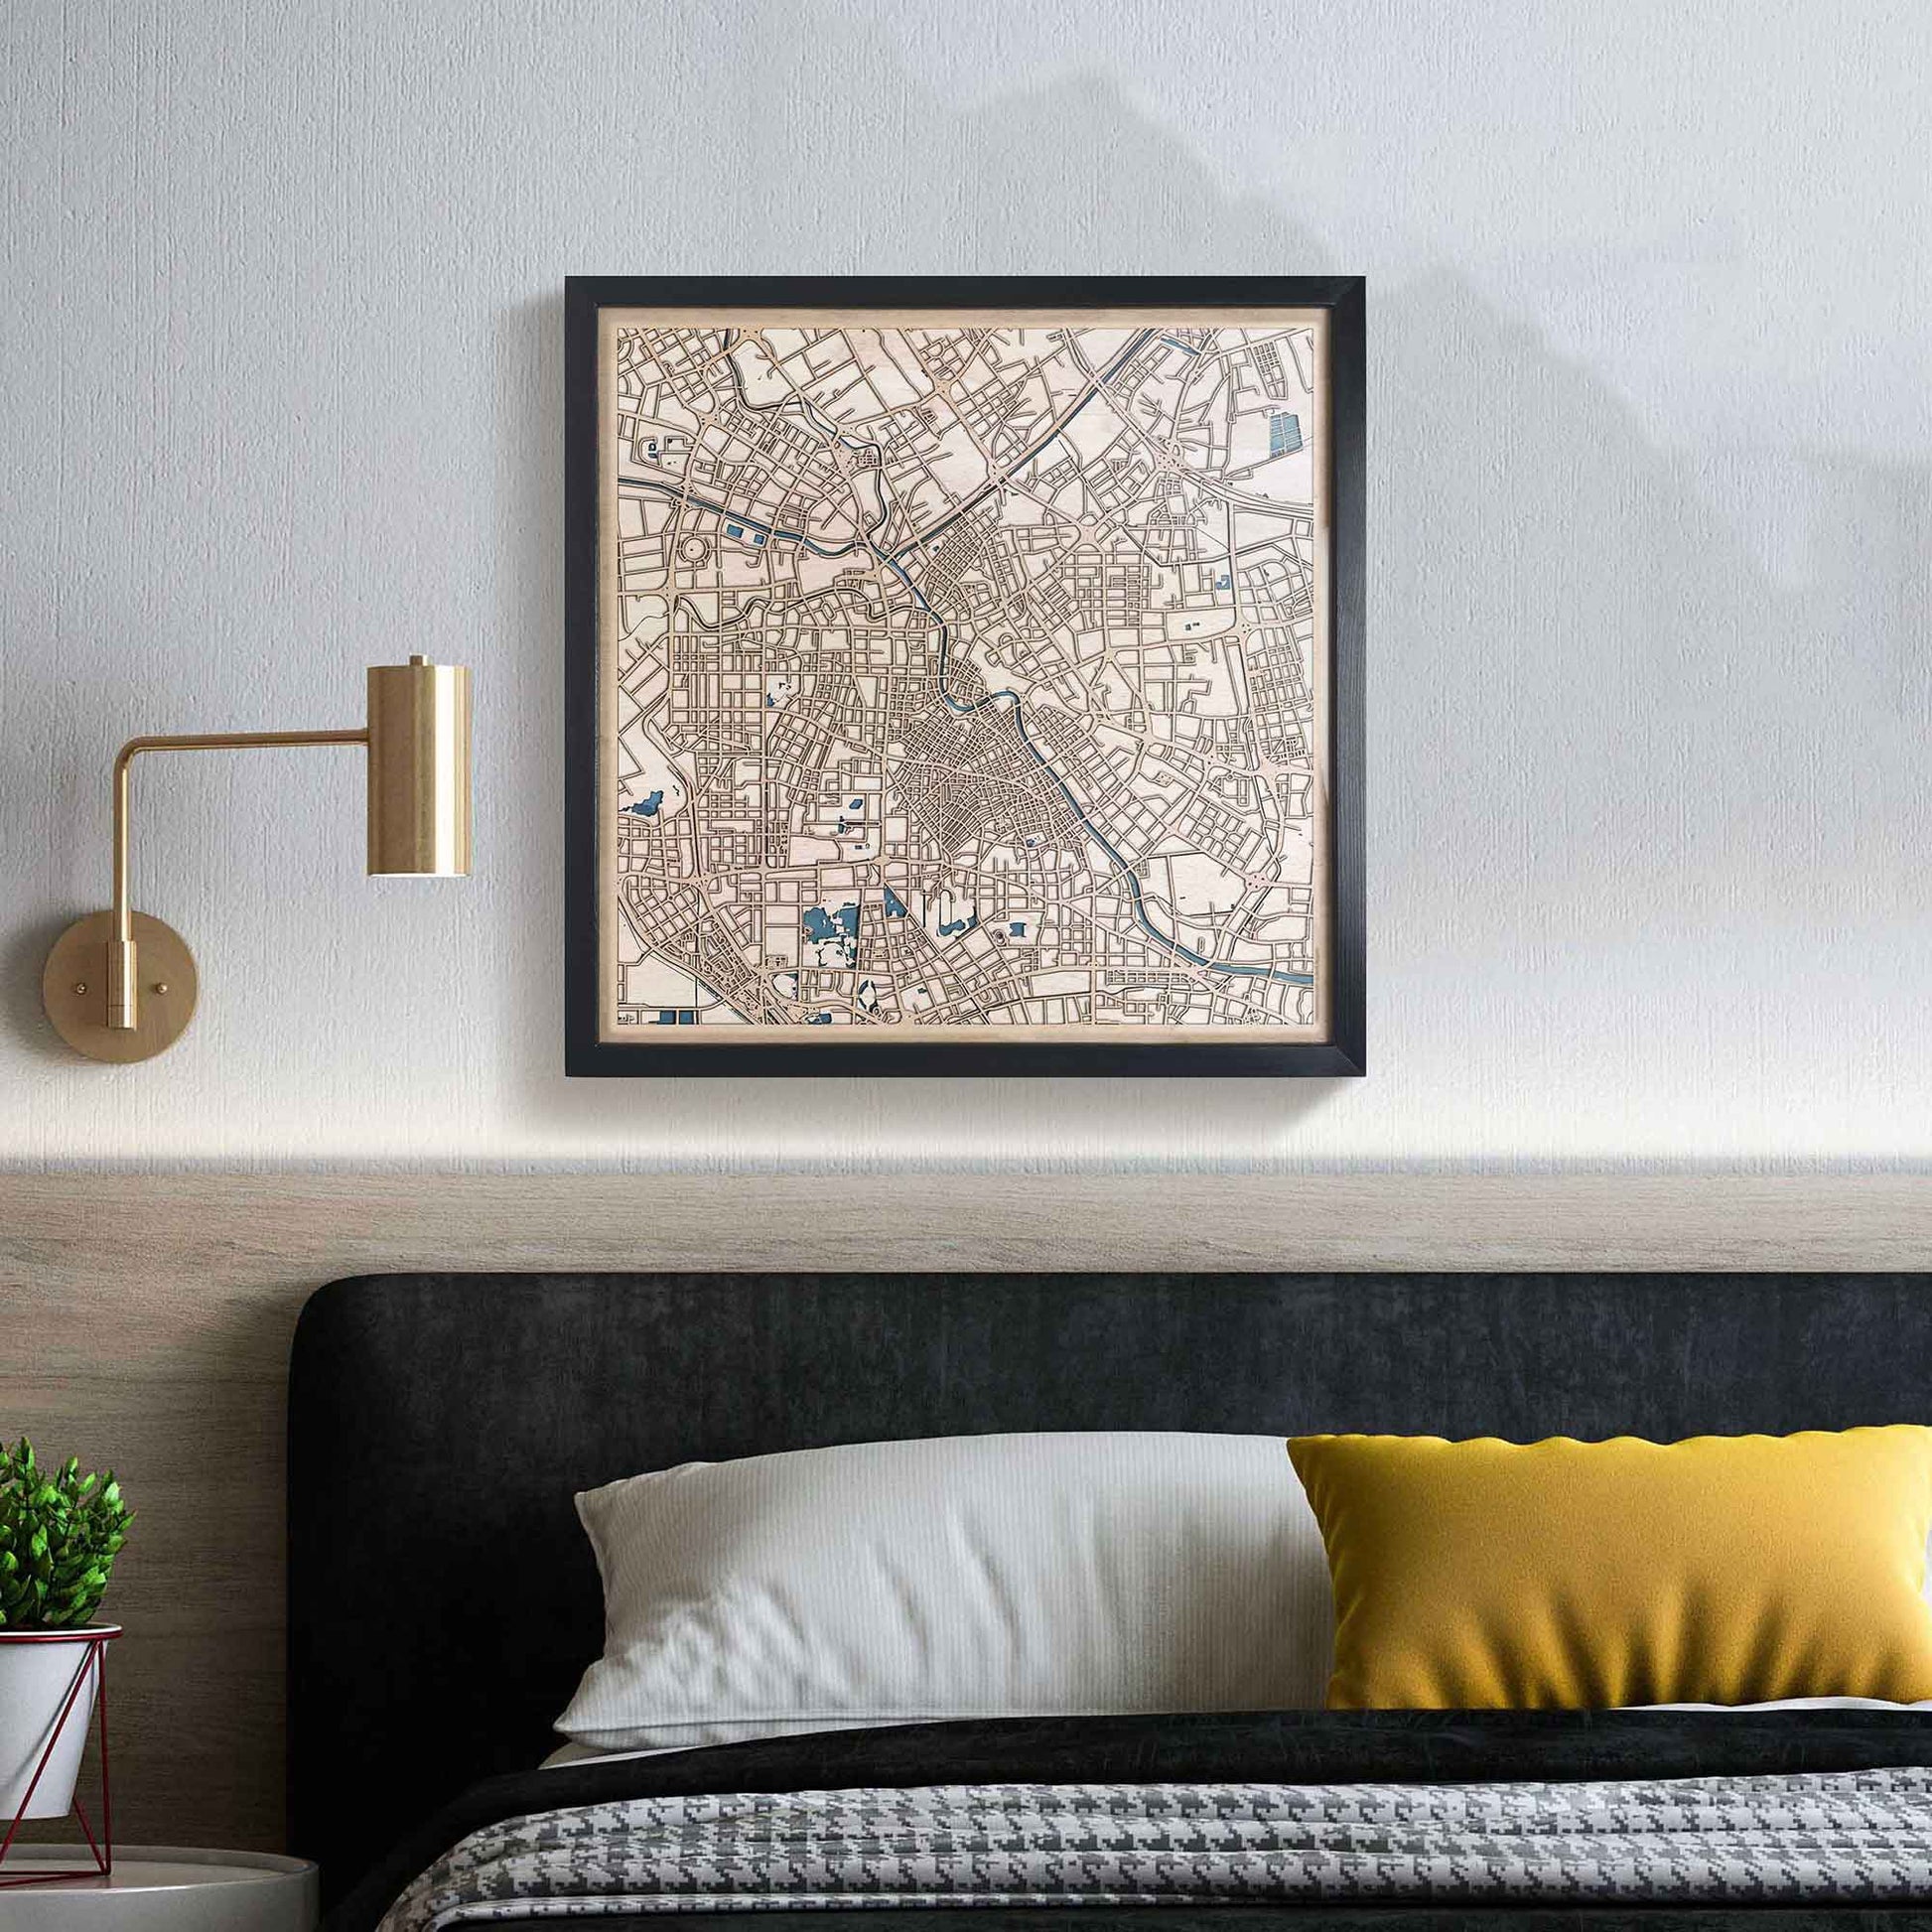 Tianjin Wooden Map by CityWood - Custom Wood Map Art - Unique Laser Cut Engraved - Anniversary Gift